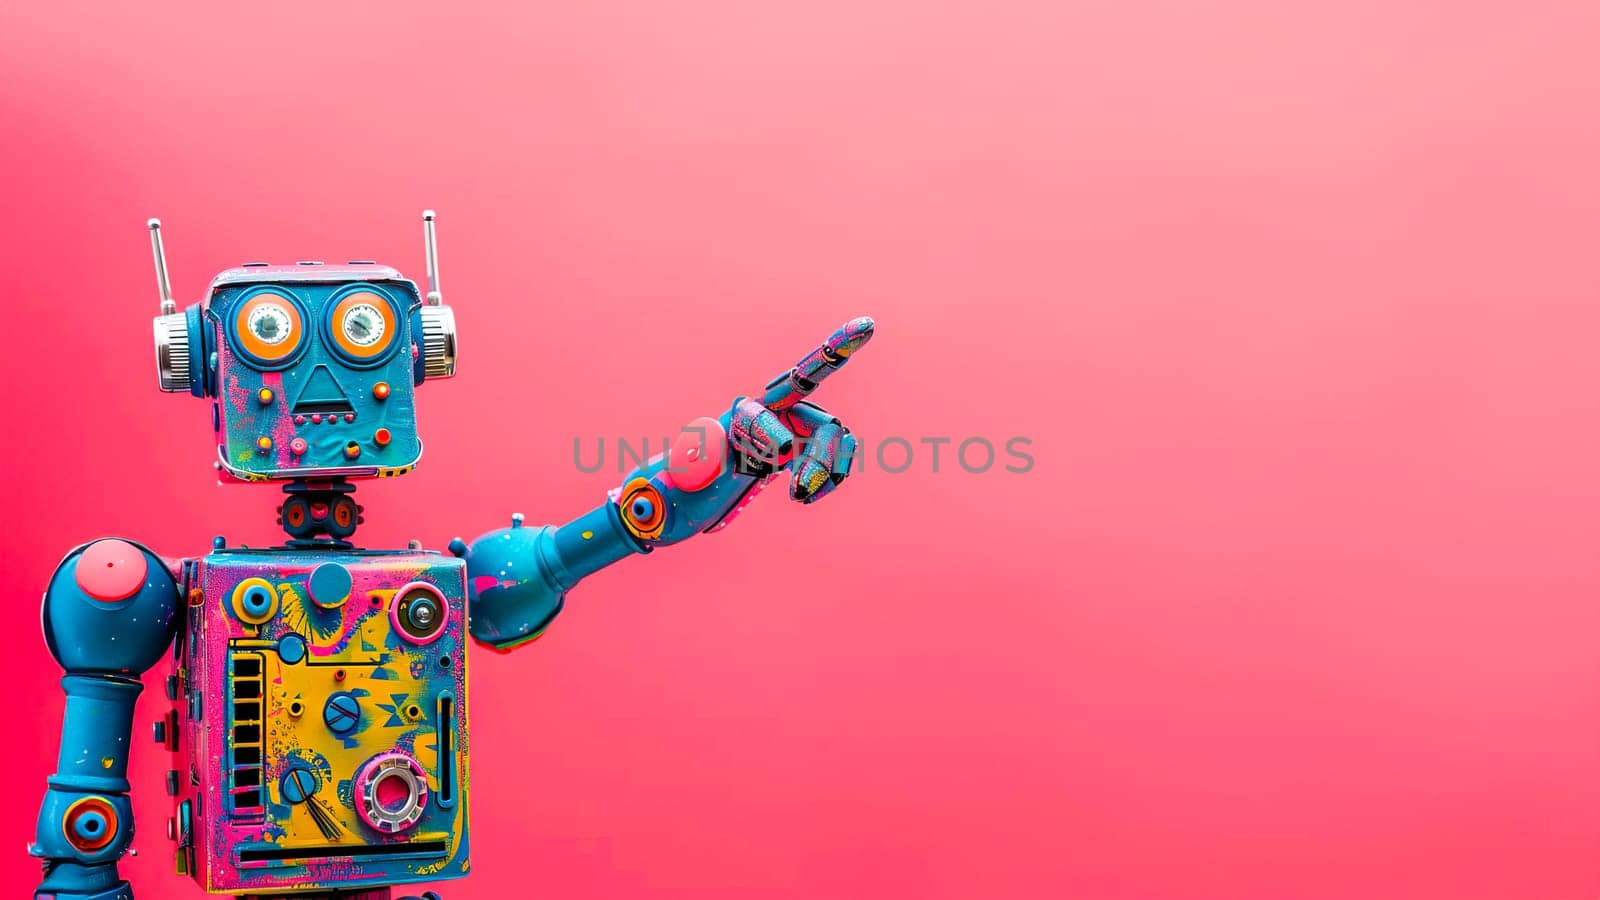 Cute blue robot pointing at an object on a vibrant pink background. by vladimka